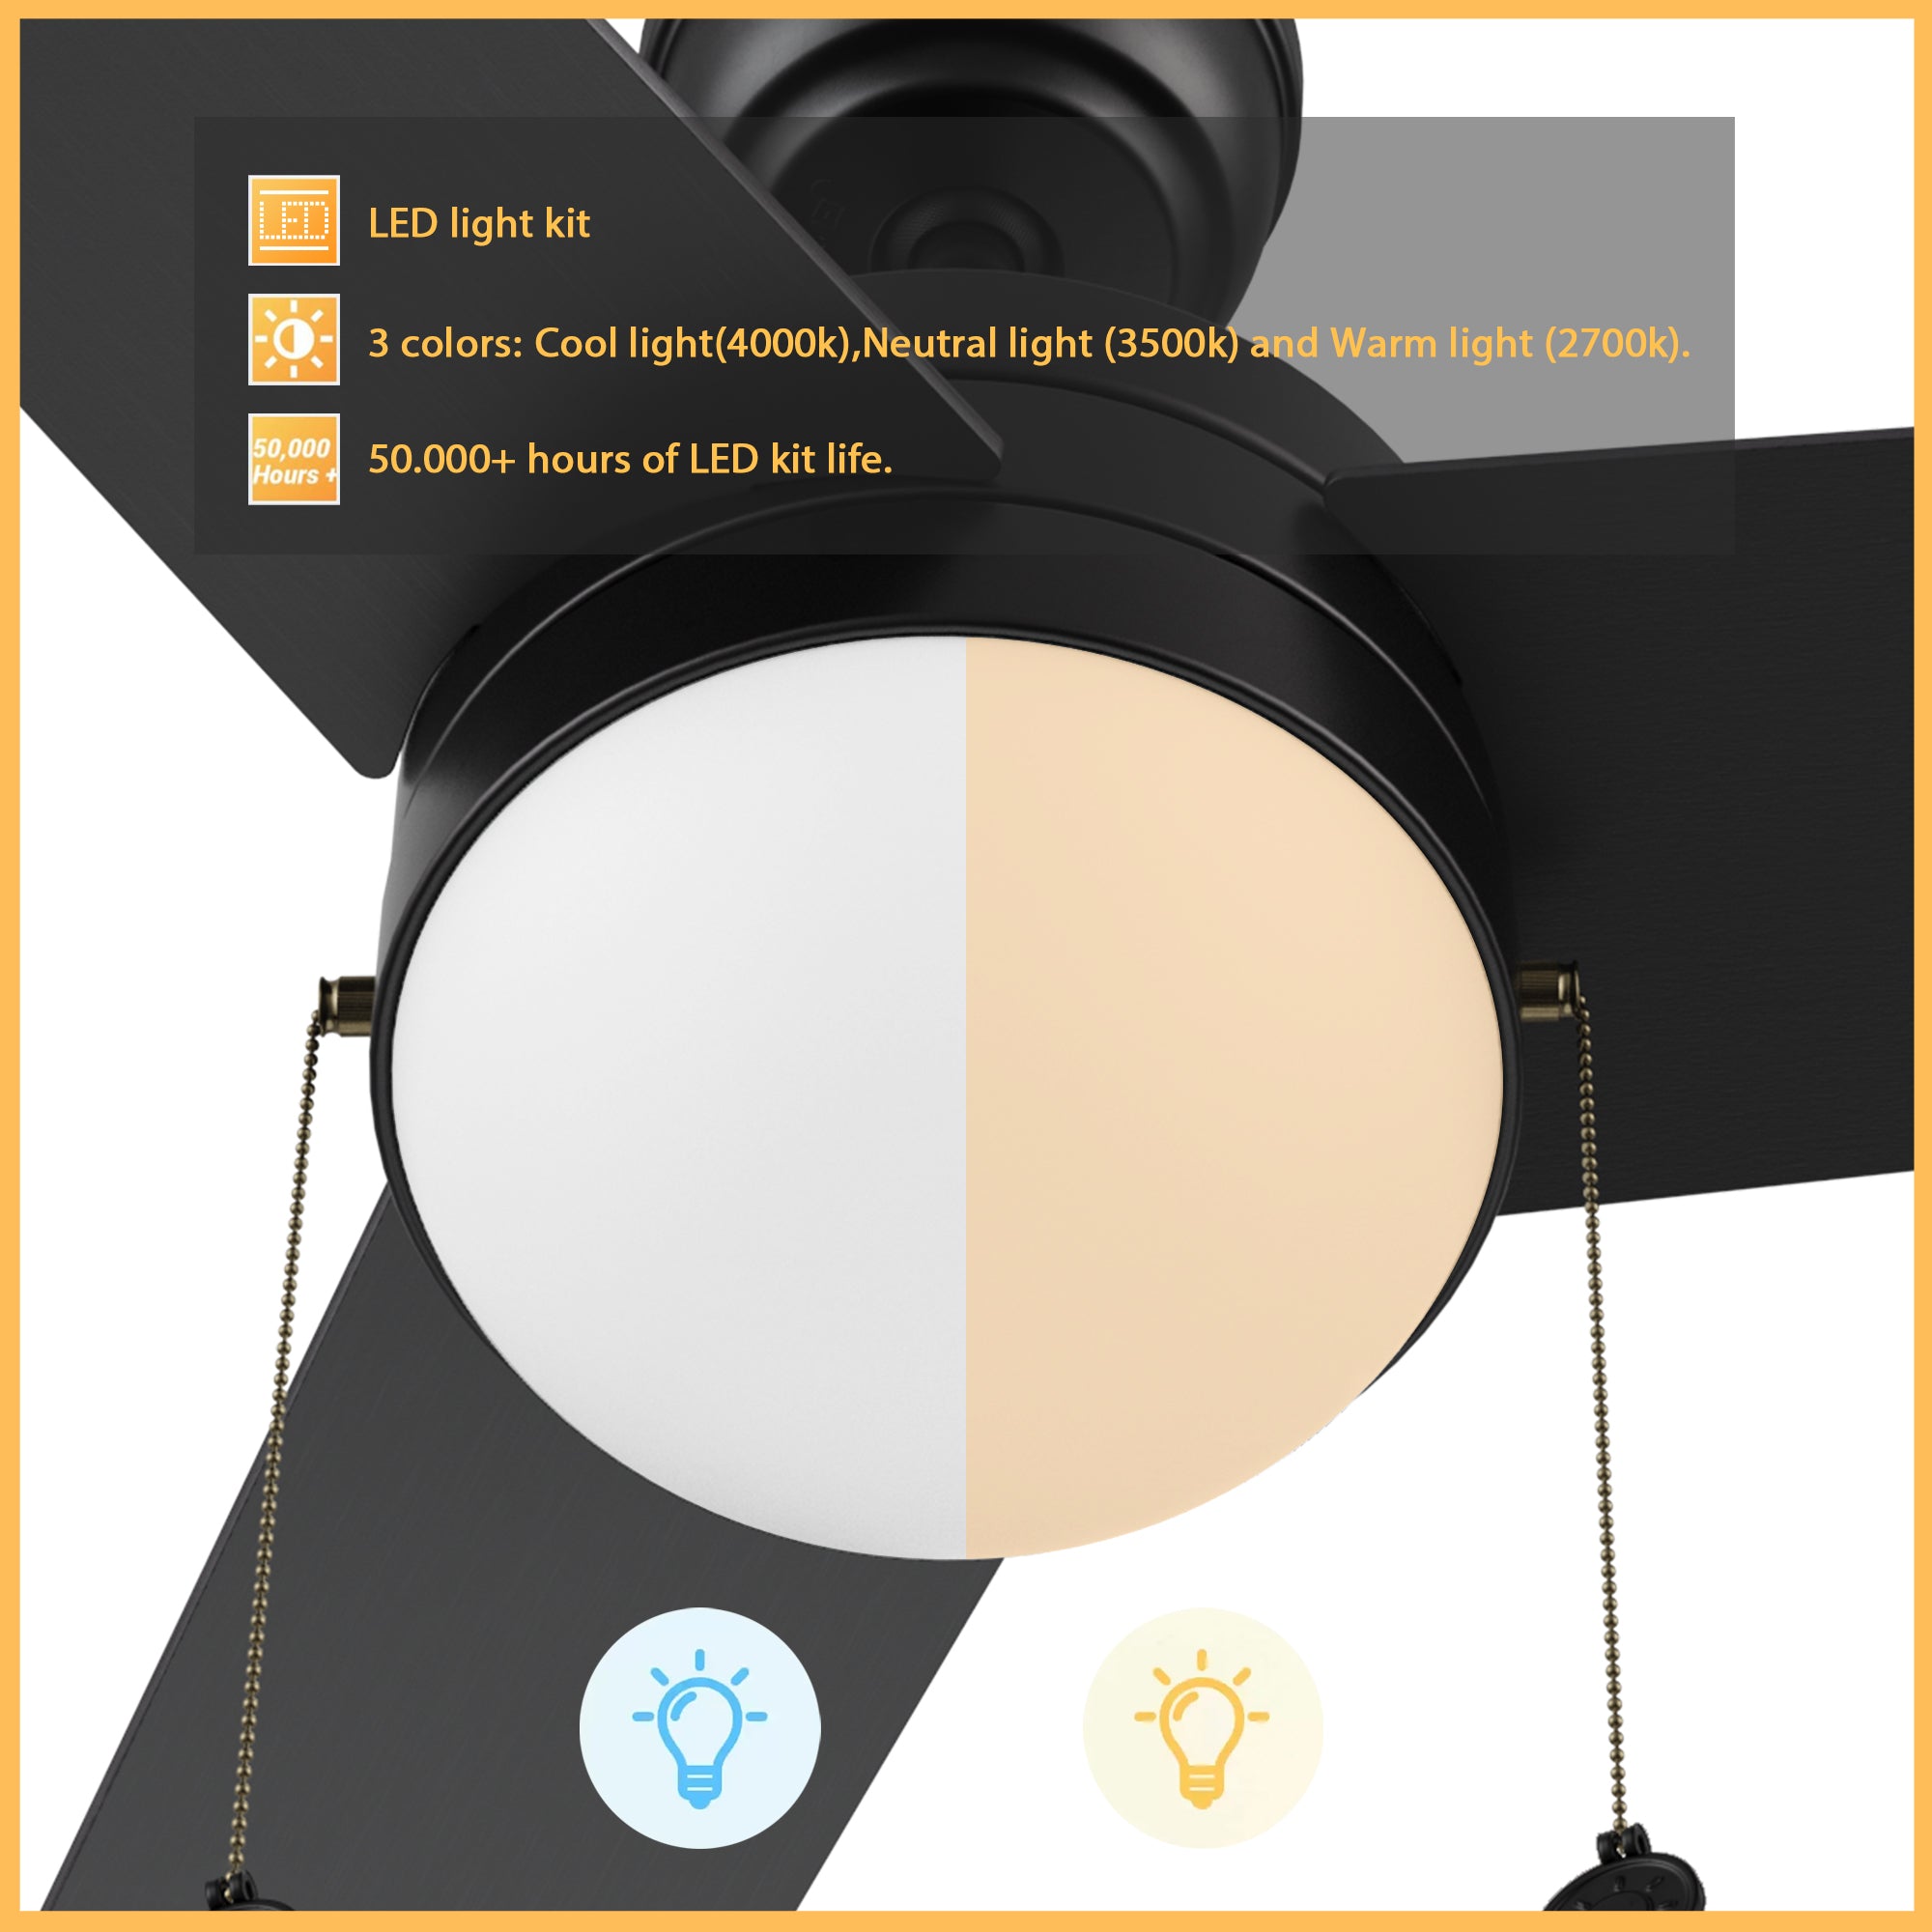 52-inch black ceiling fan with LED light kit, 22 energy power, and 2116 lumens brightness output. With more than 50000 hours of LED kit life, this ceiling fan light provides 3 colors from 2700K warm light to 4000K cool light. 